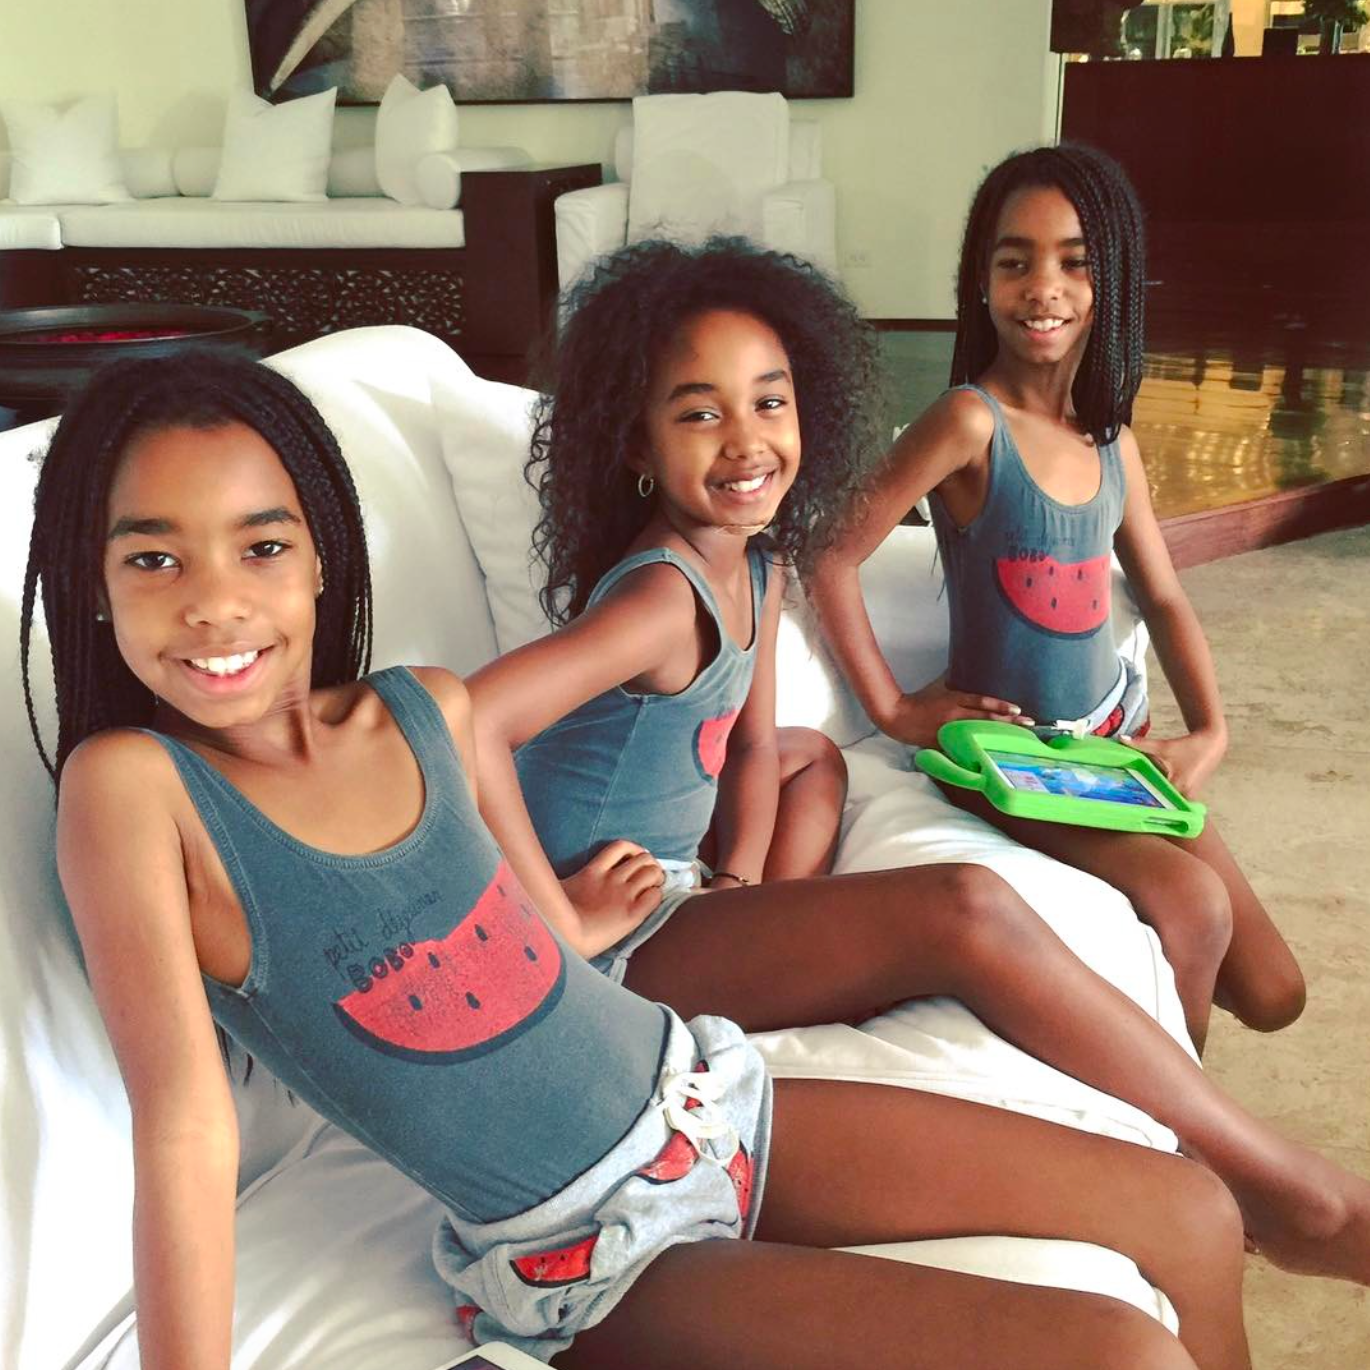 Diddy And His Darling Daughters Will Make Your Heart Smile
